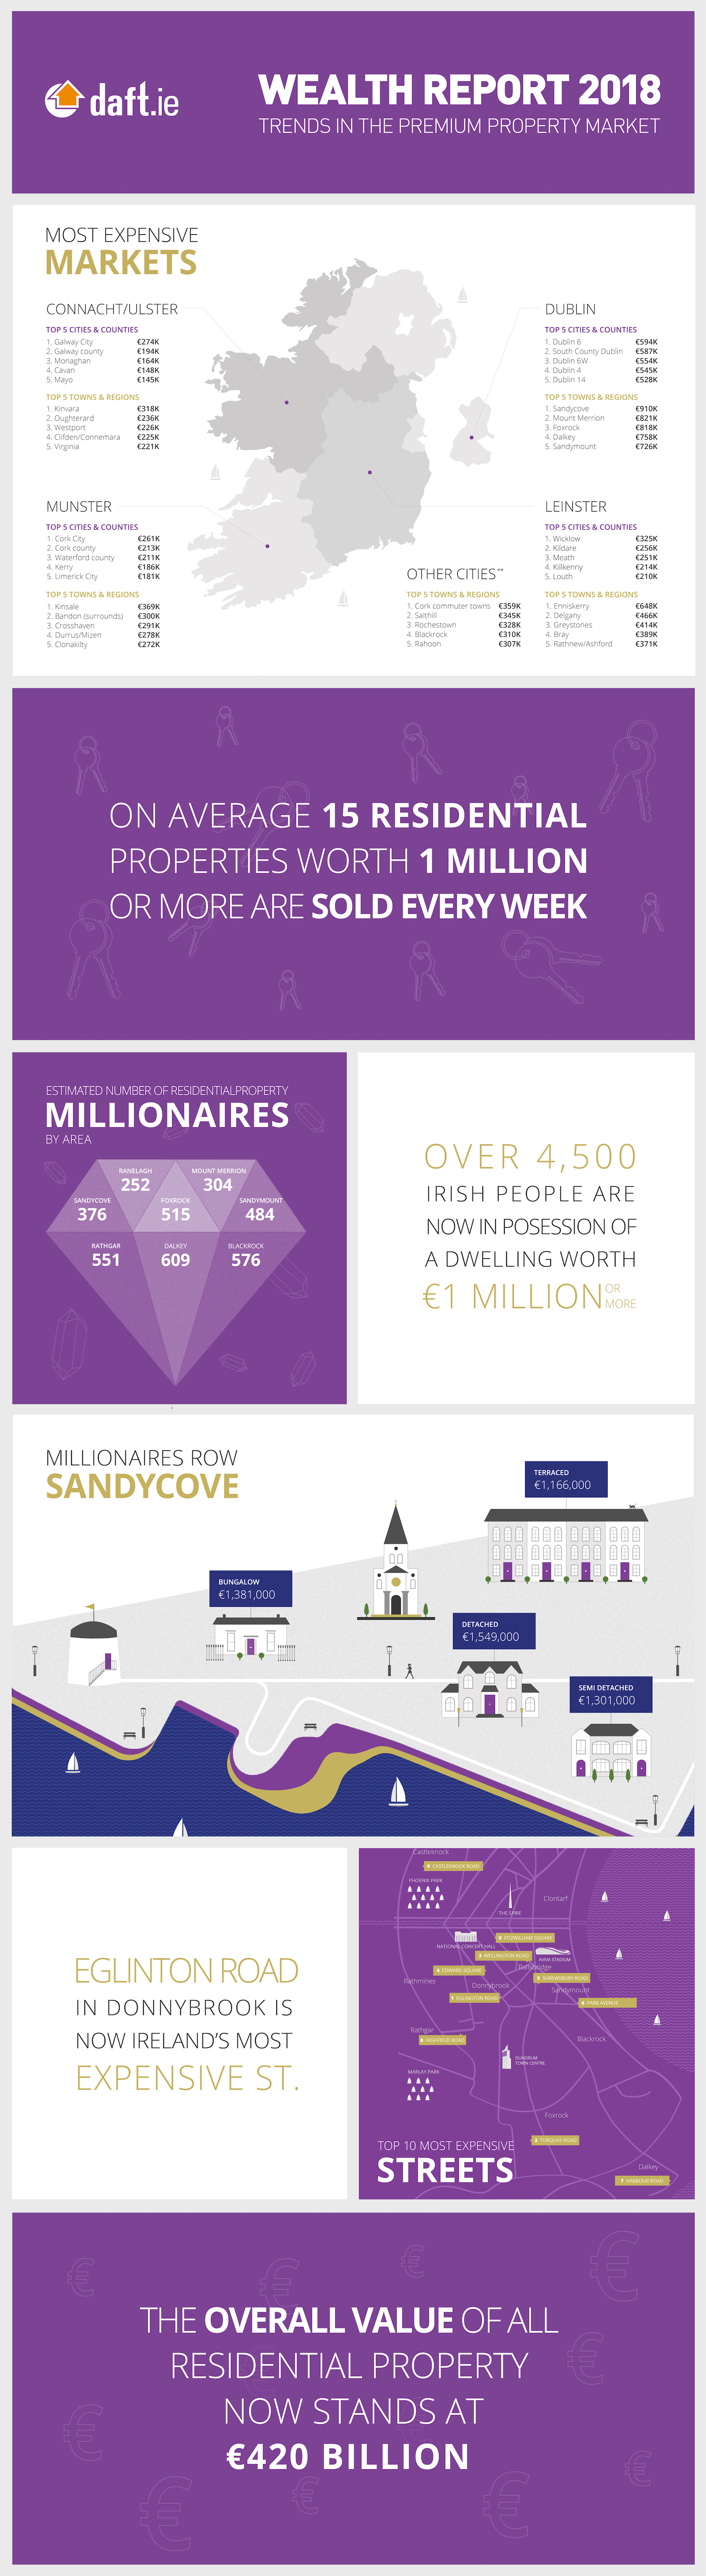 Daft.ie Wealth Report: 2018 Infographic